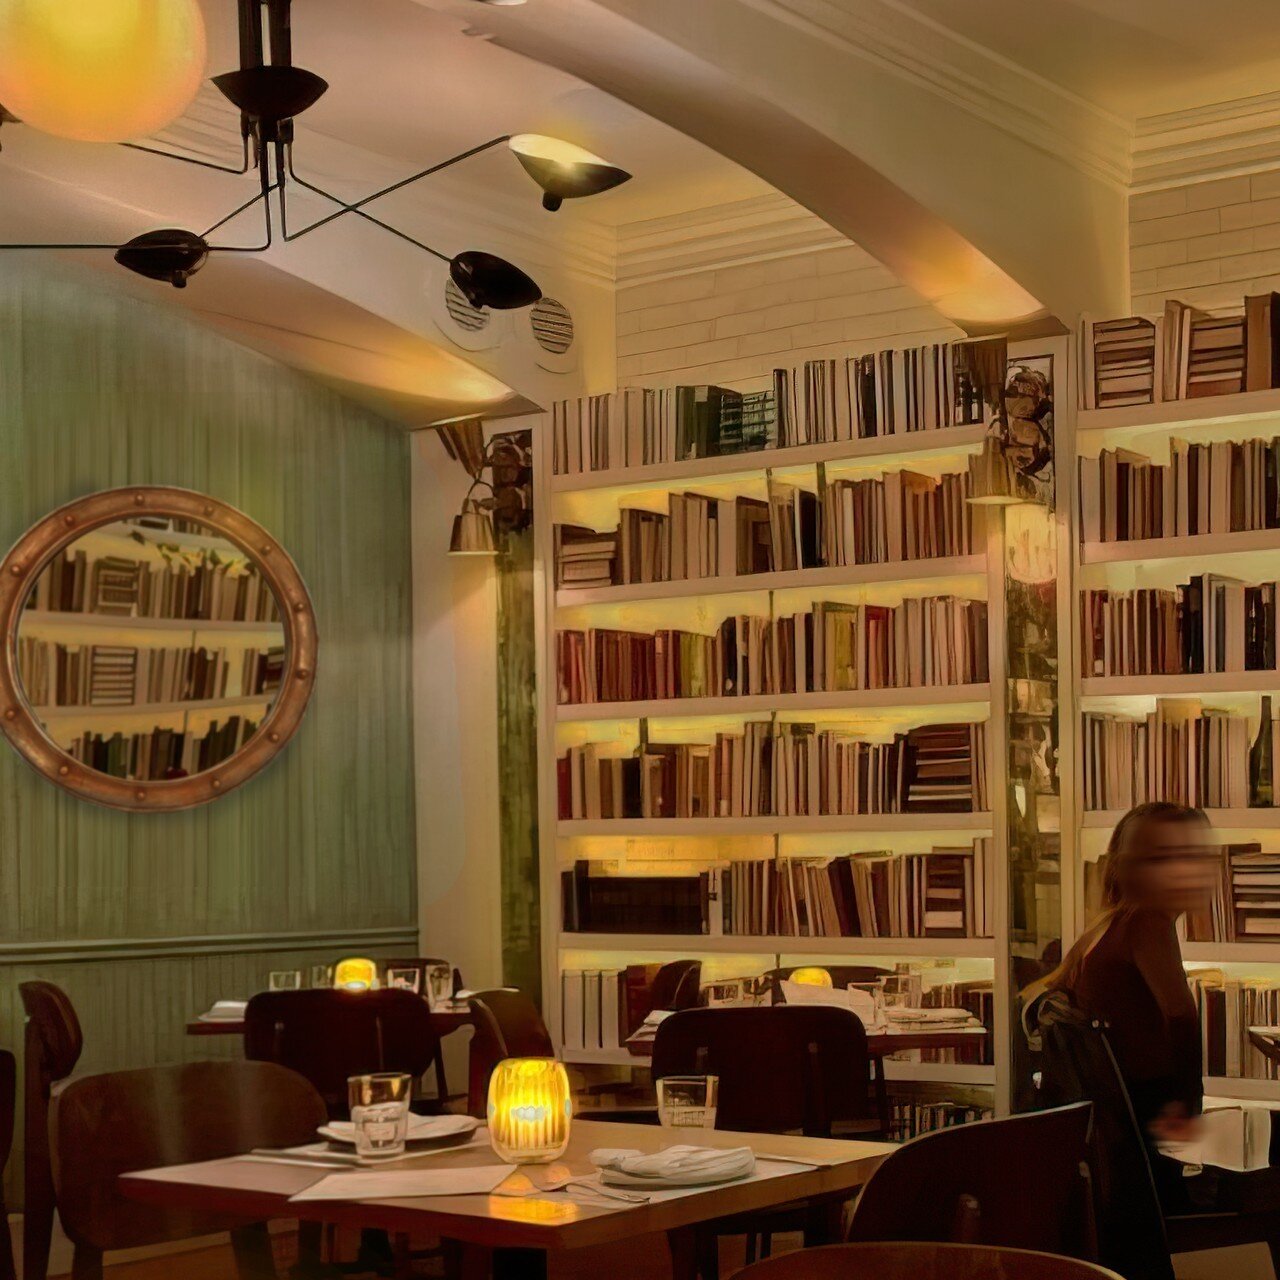 Like Italian food? Check out our new project Osteria Accademia on the Upper West Side, with a delicious menu focused on house-made pastas and other favorites - the food is great!⁠
.⁠
3500 vintage books, repurposed from a decommissioned library glow i